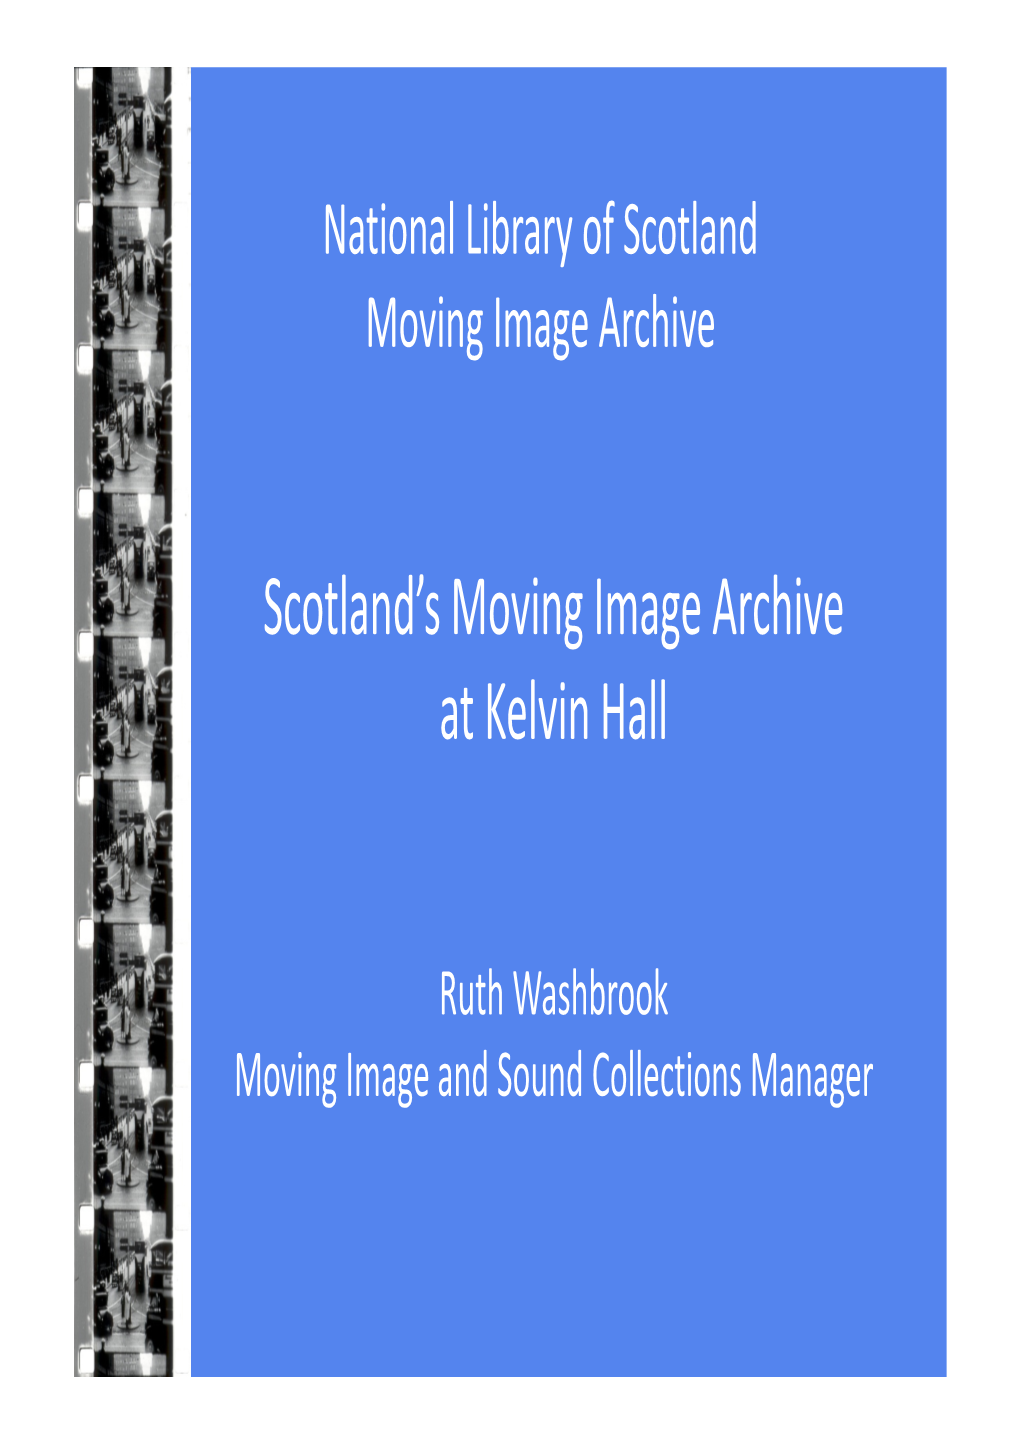 Scotland's Moving Image Archive at Kelvin Hall